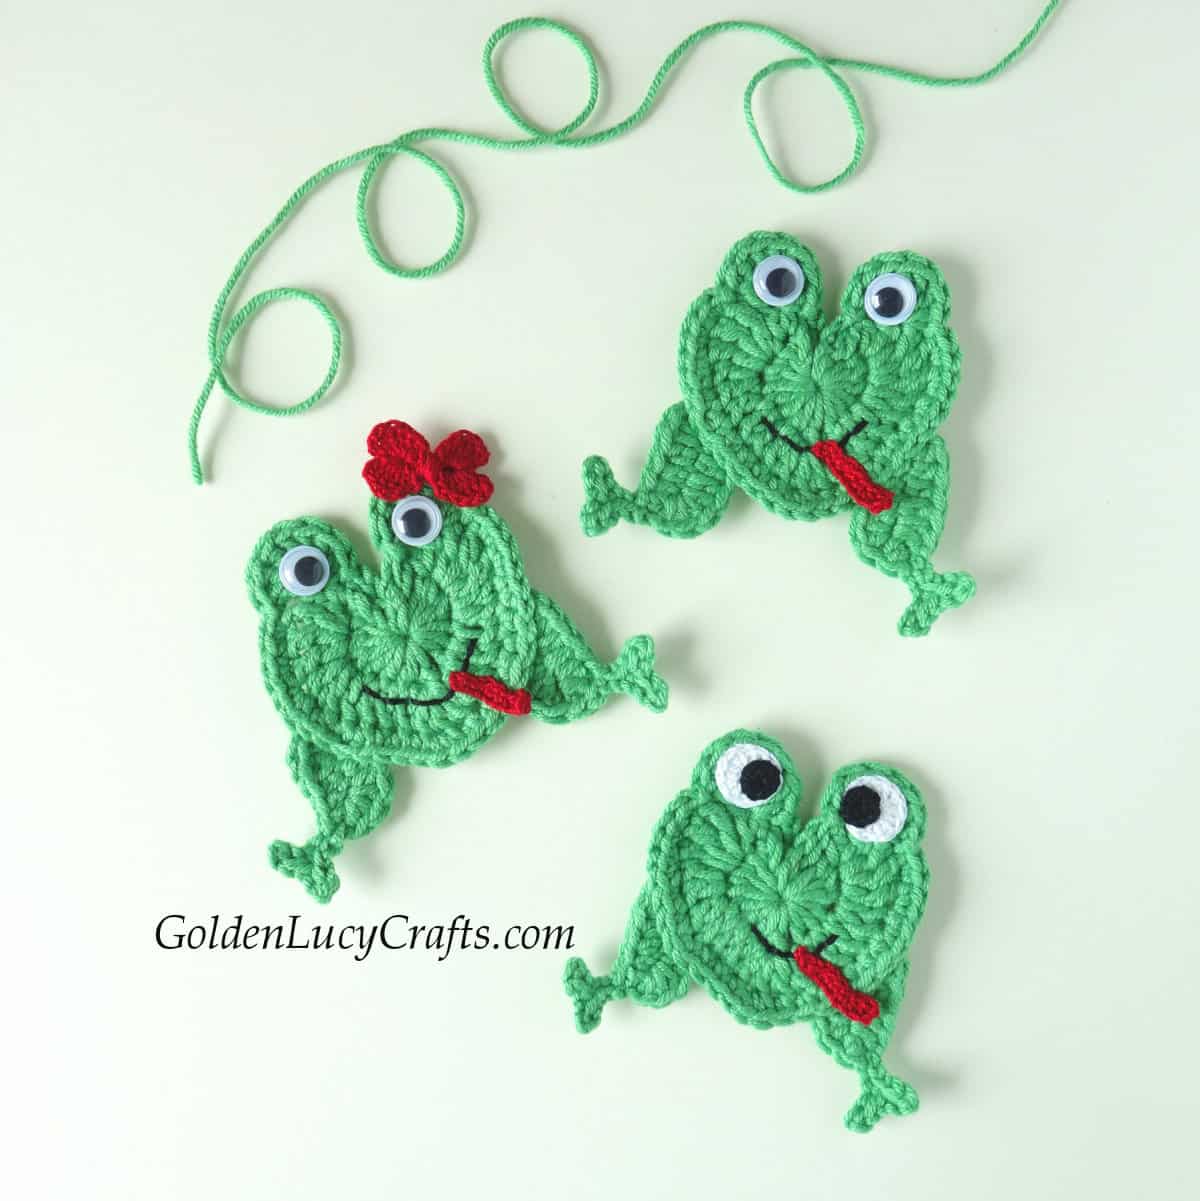 Three green crocheted heart-shaped frogs appliques.